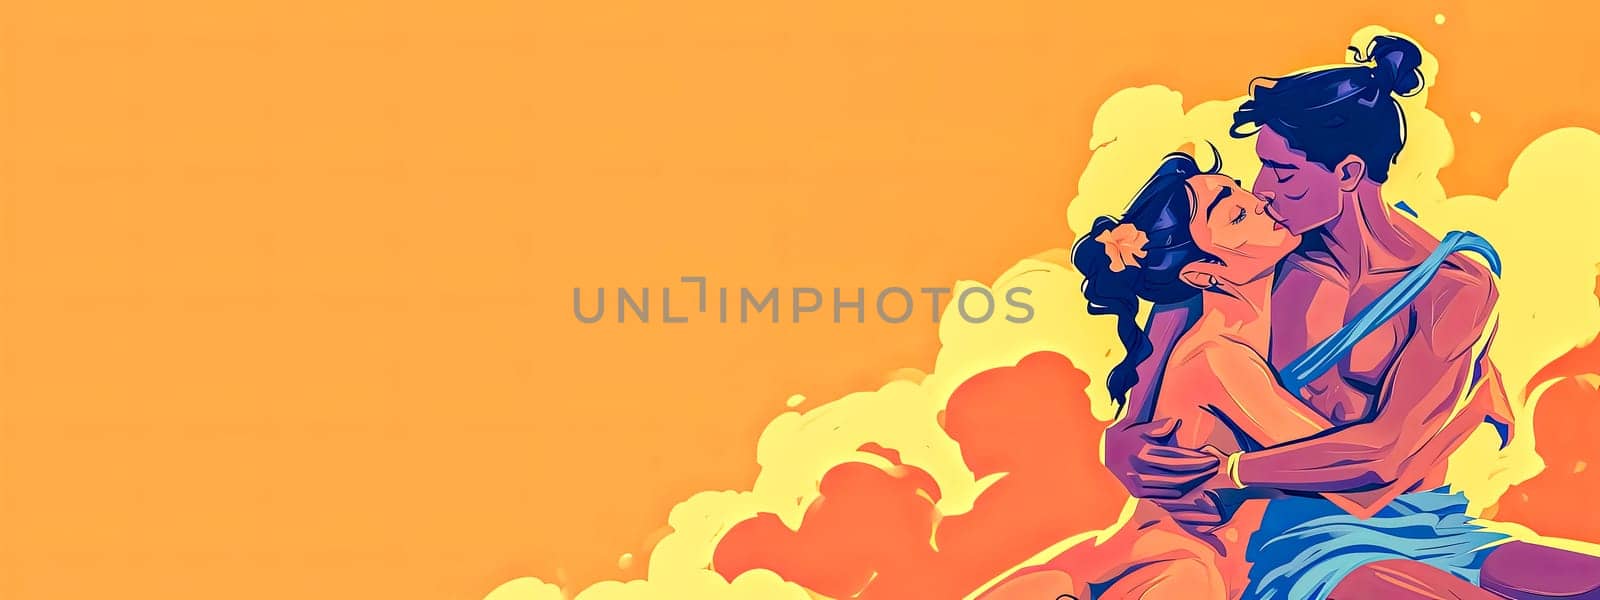 couple in a loving embrace, set against a vibrant orange cloud-like background, ideal for a romantic or Valentine's Day themed banner. kamasutra